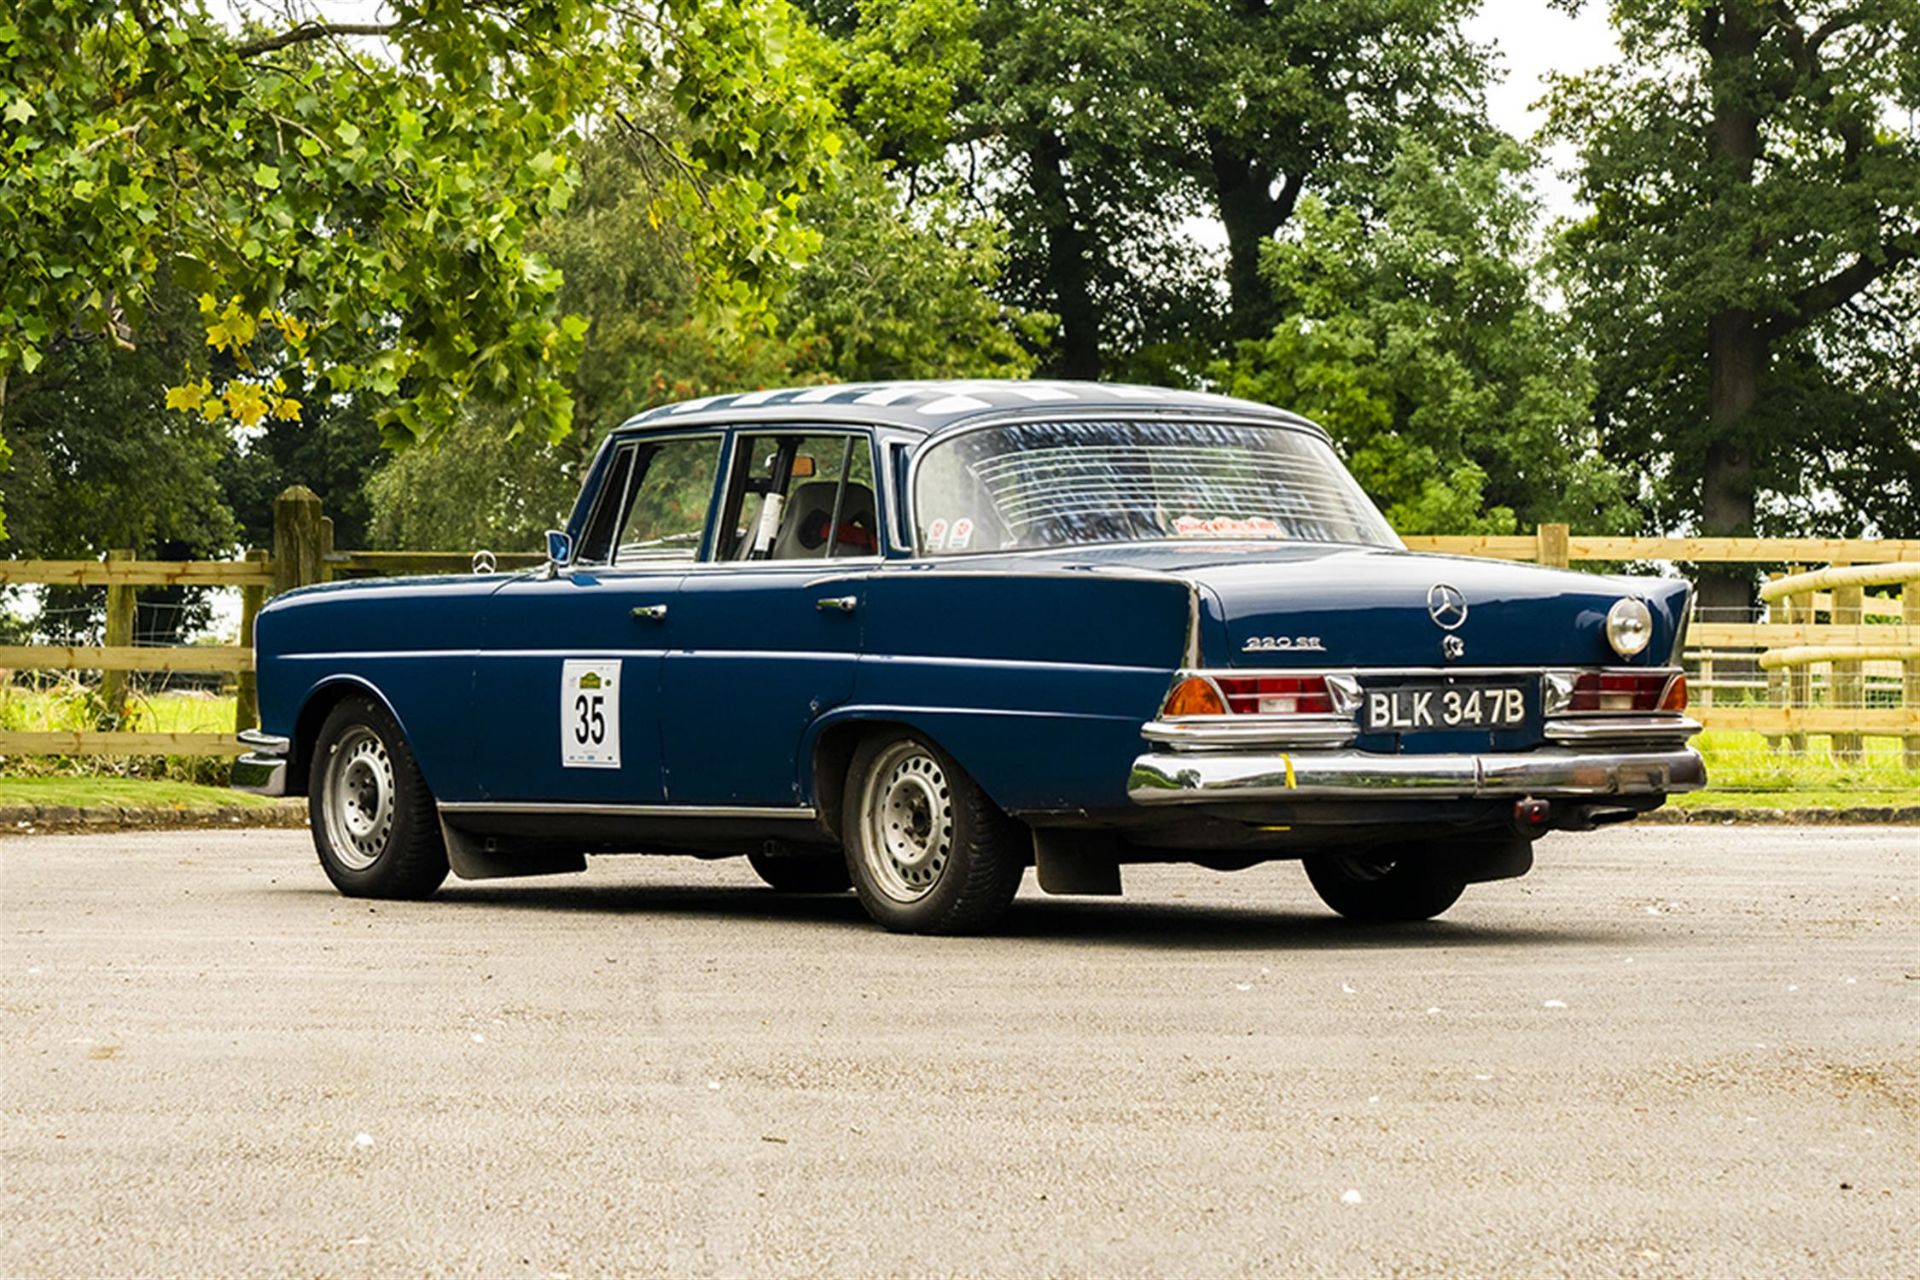 1964 Mercedes-Benz 220SE Fintail Historic Rally Car (W111) - Image 4 of 10